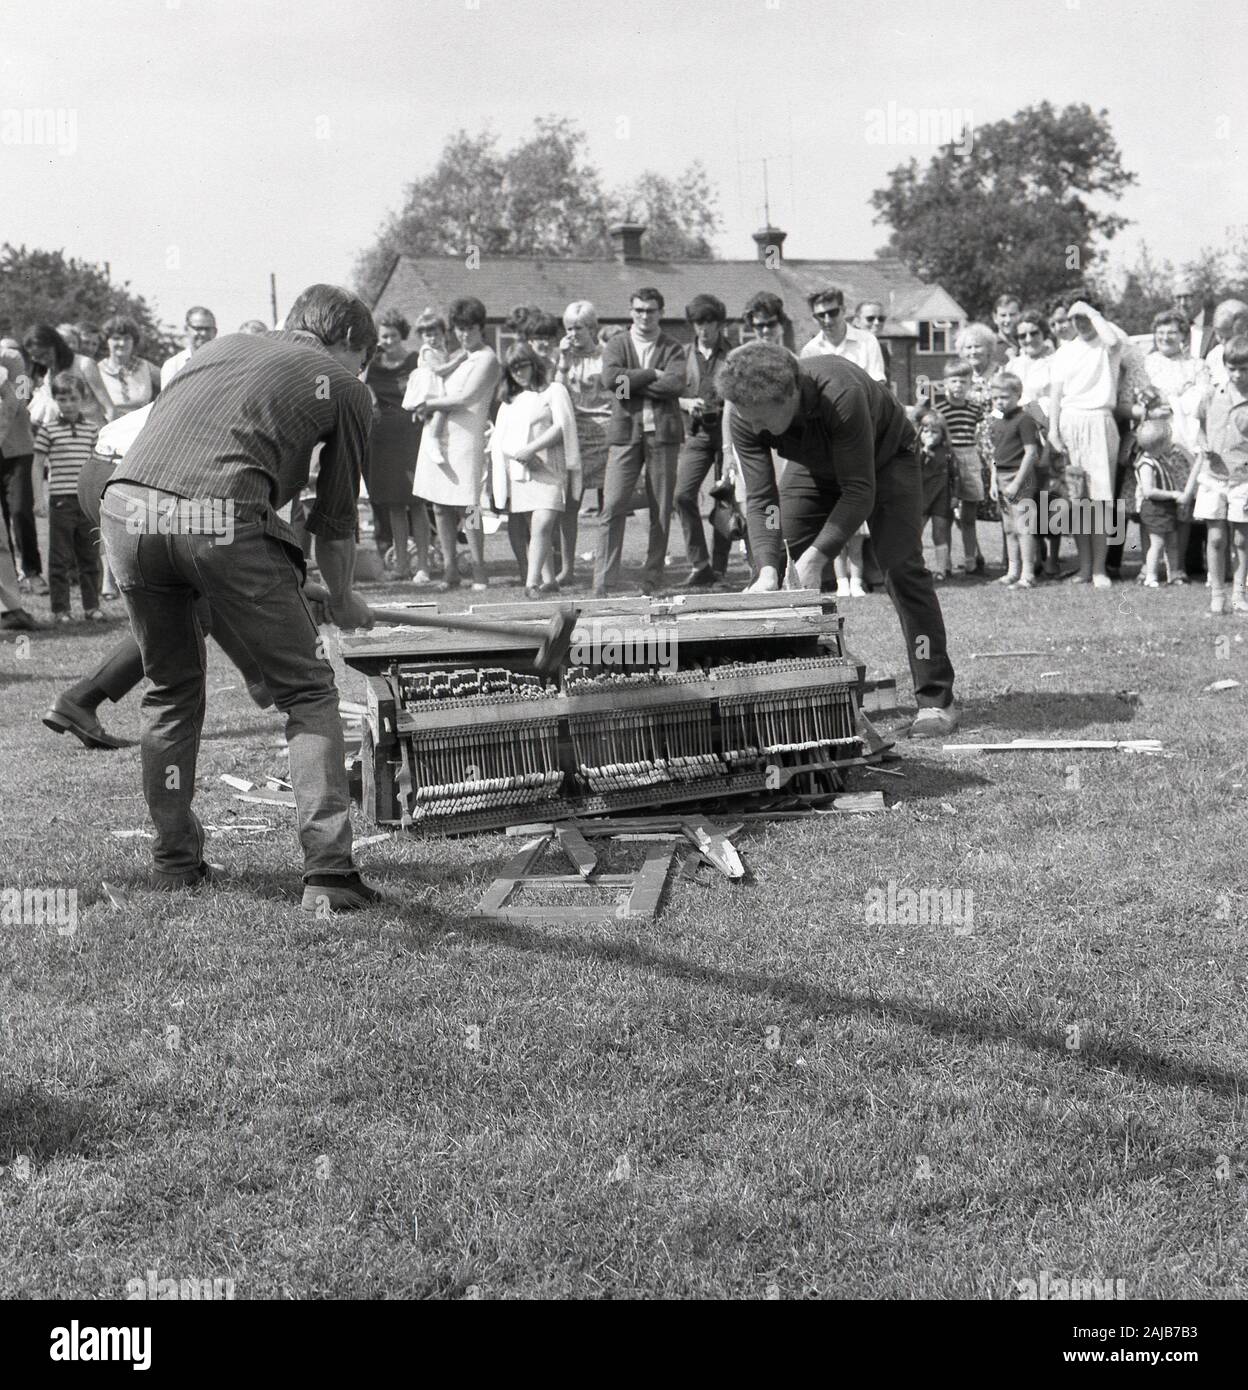 1960s, historical, piano smashing contest, at an English village fete, visitors watch two men using sledgehammers to destroy an upright piano into small pieces which could be passed through a 9-inch diameter hole. Such contests were popular at village fetes in the UK in the 1960s. Stock Photo